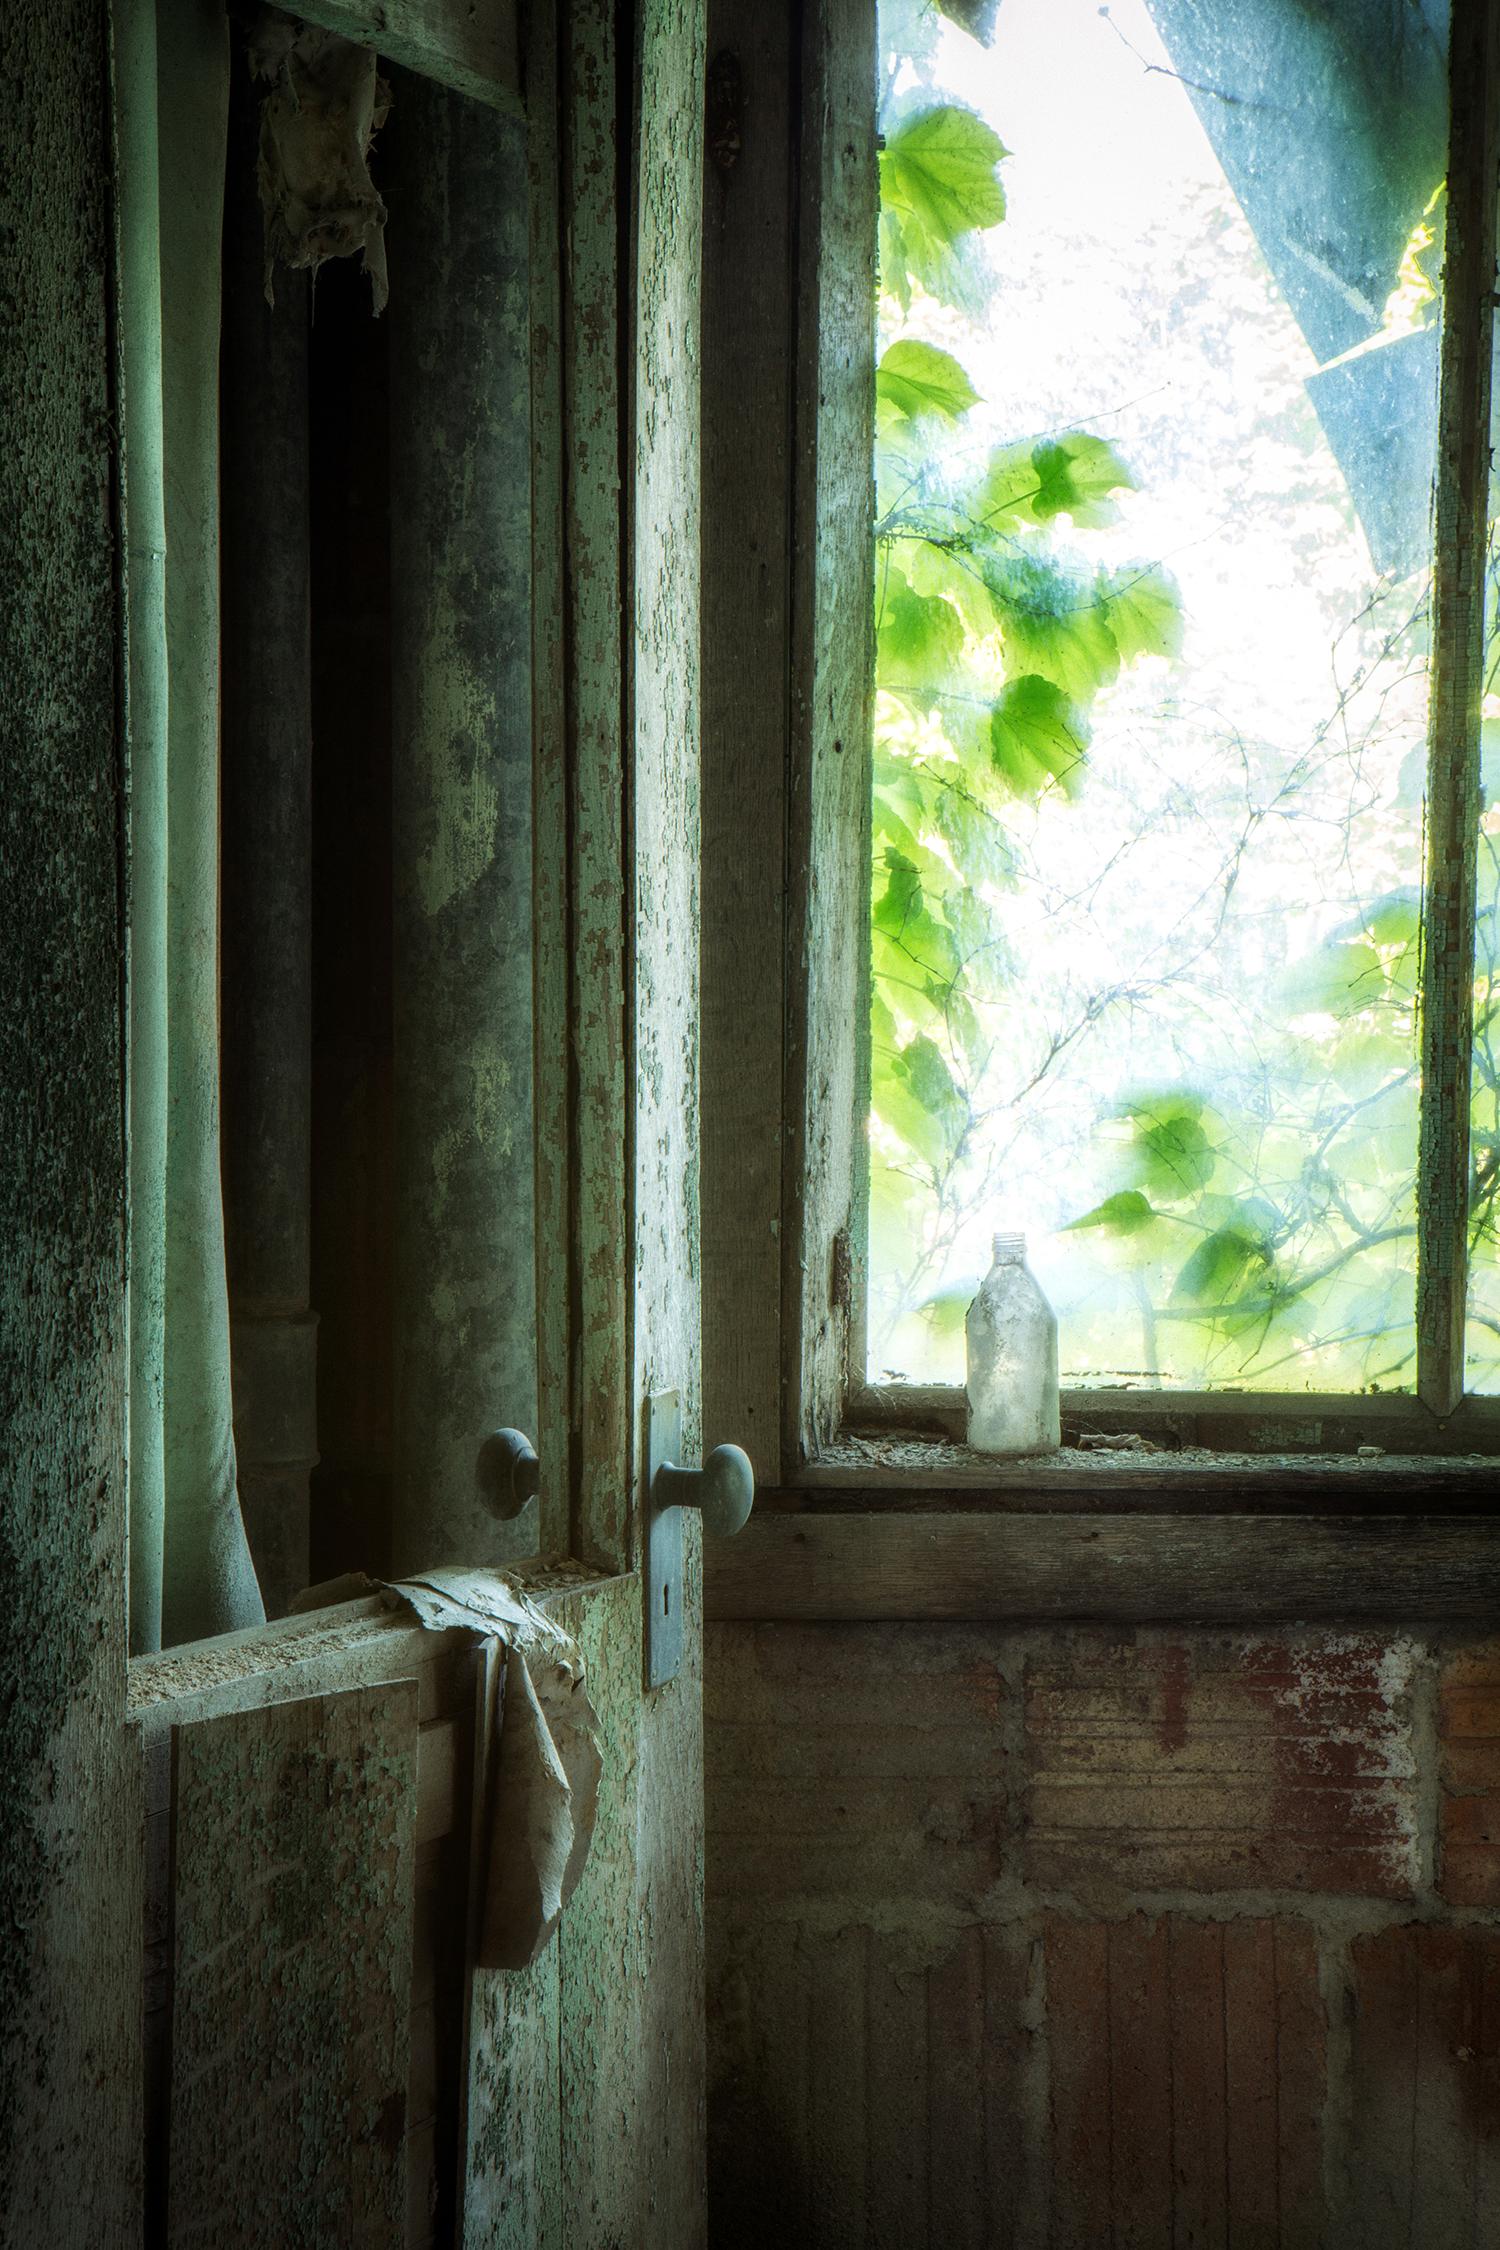 Rebecca Skinner Still-Life Photograph - "Remnants", contemporary, abandoned, window, door, blue, green, color photograph